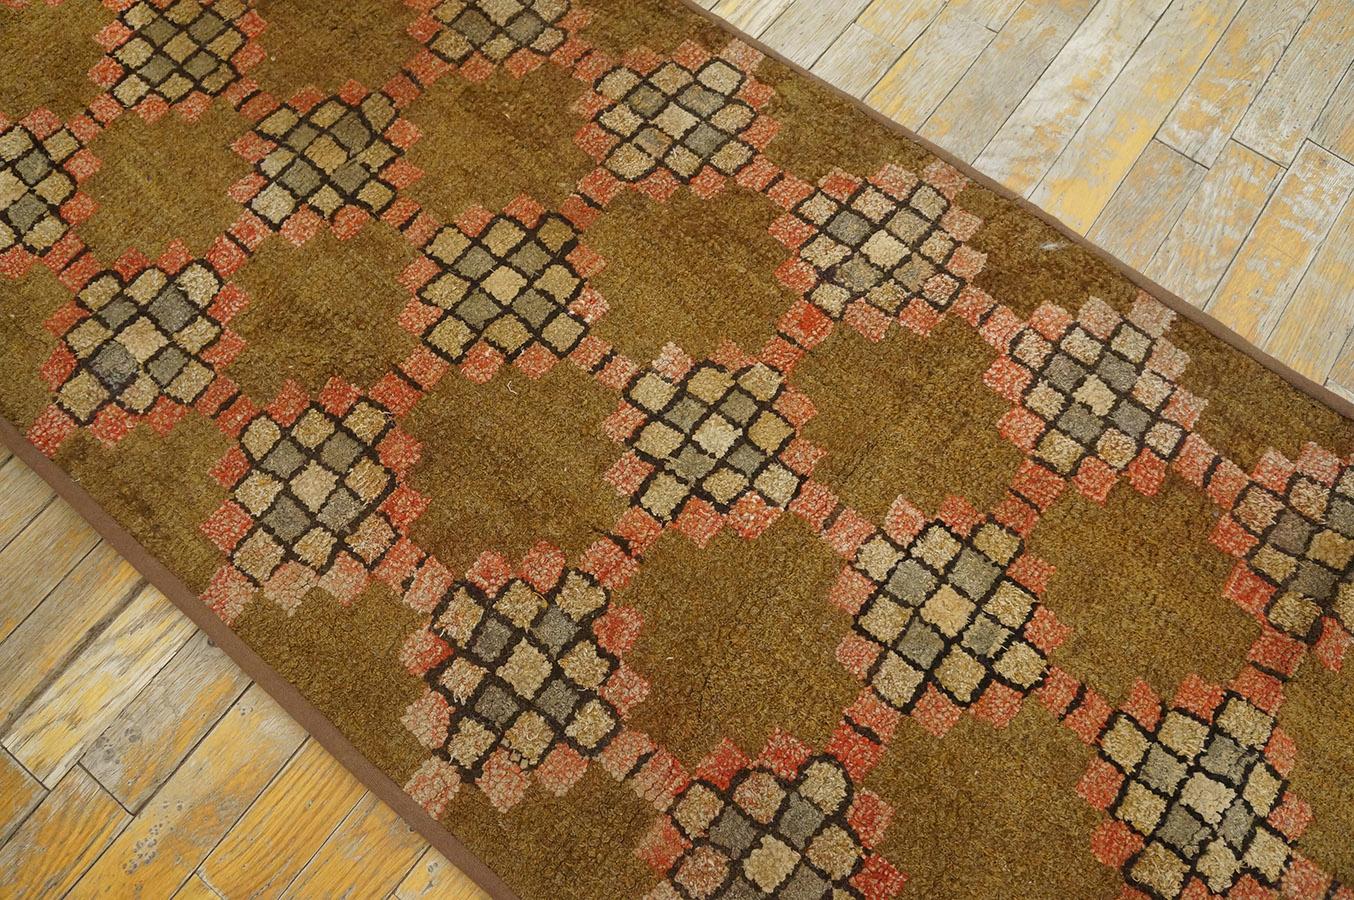 Mid 20th Century American Hooked Rug ( 2' 3'' x 6' 4'' - 68 x 193 cm ) For Sale 5